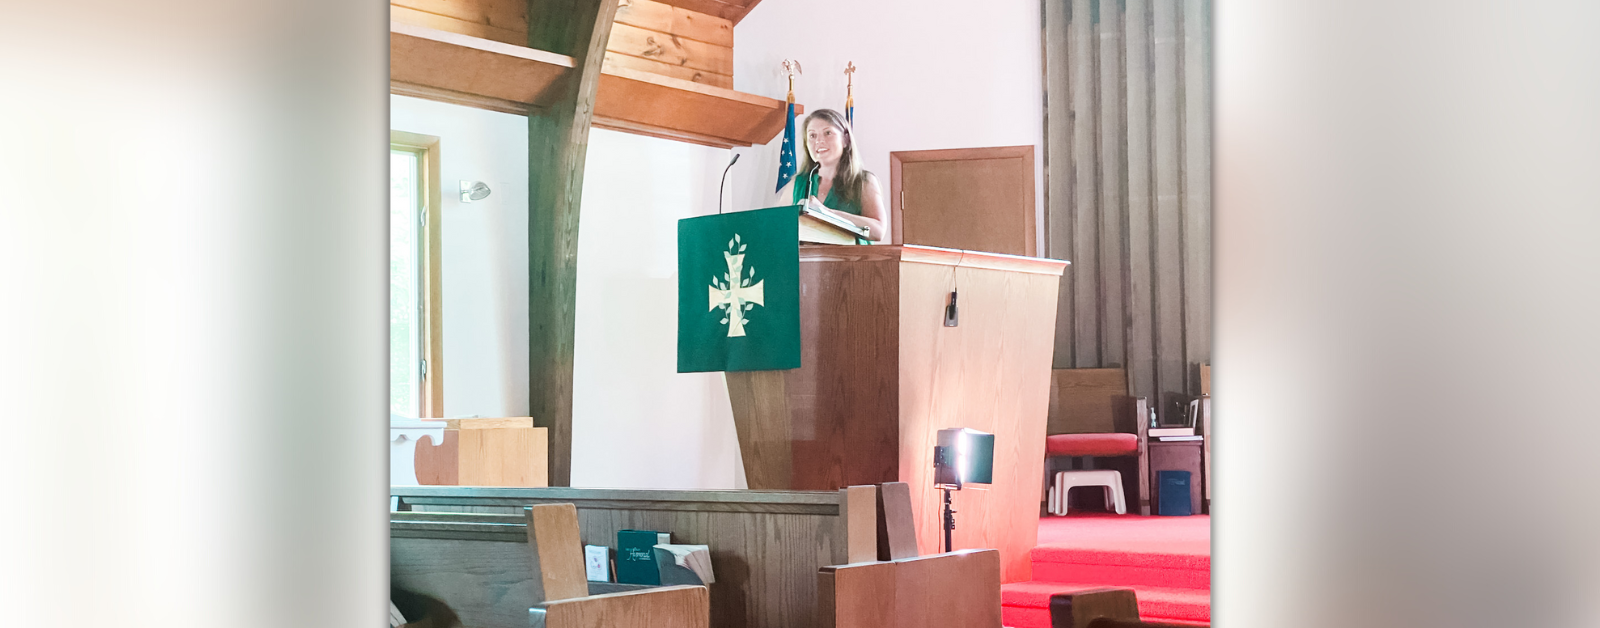 Amy Julia stands at a pulpit and preaches.